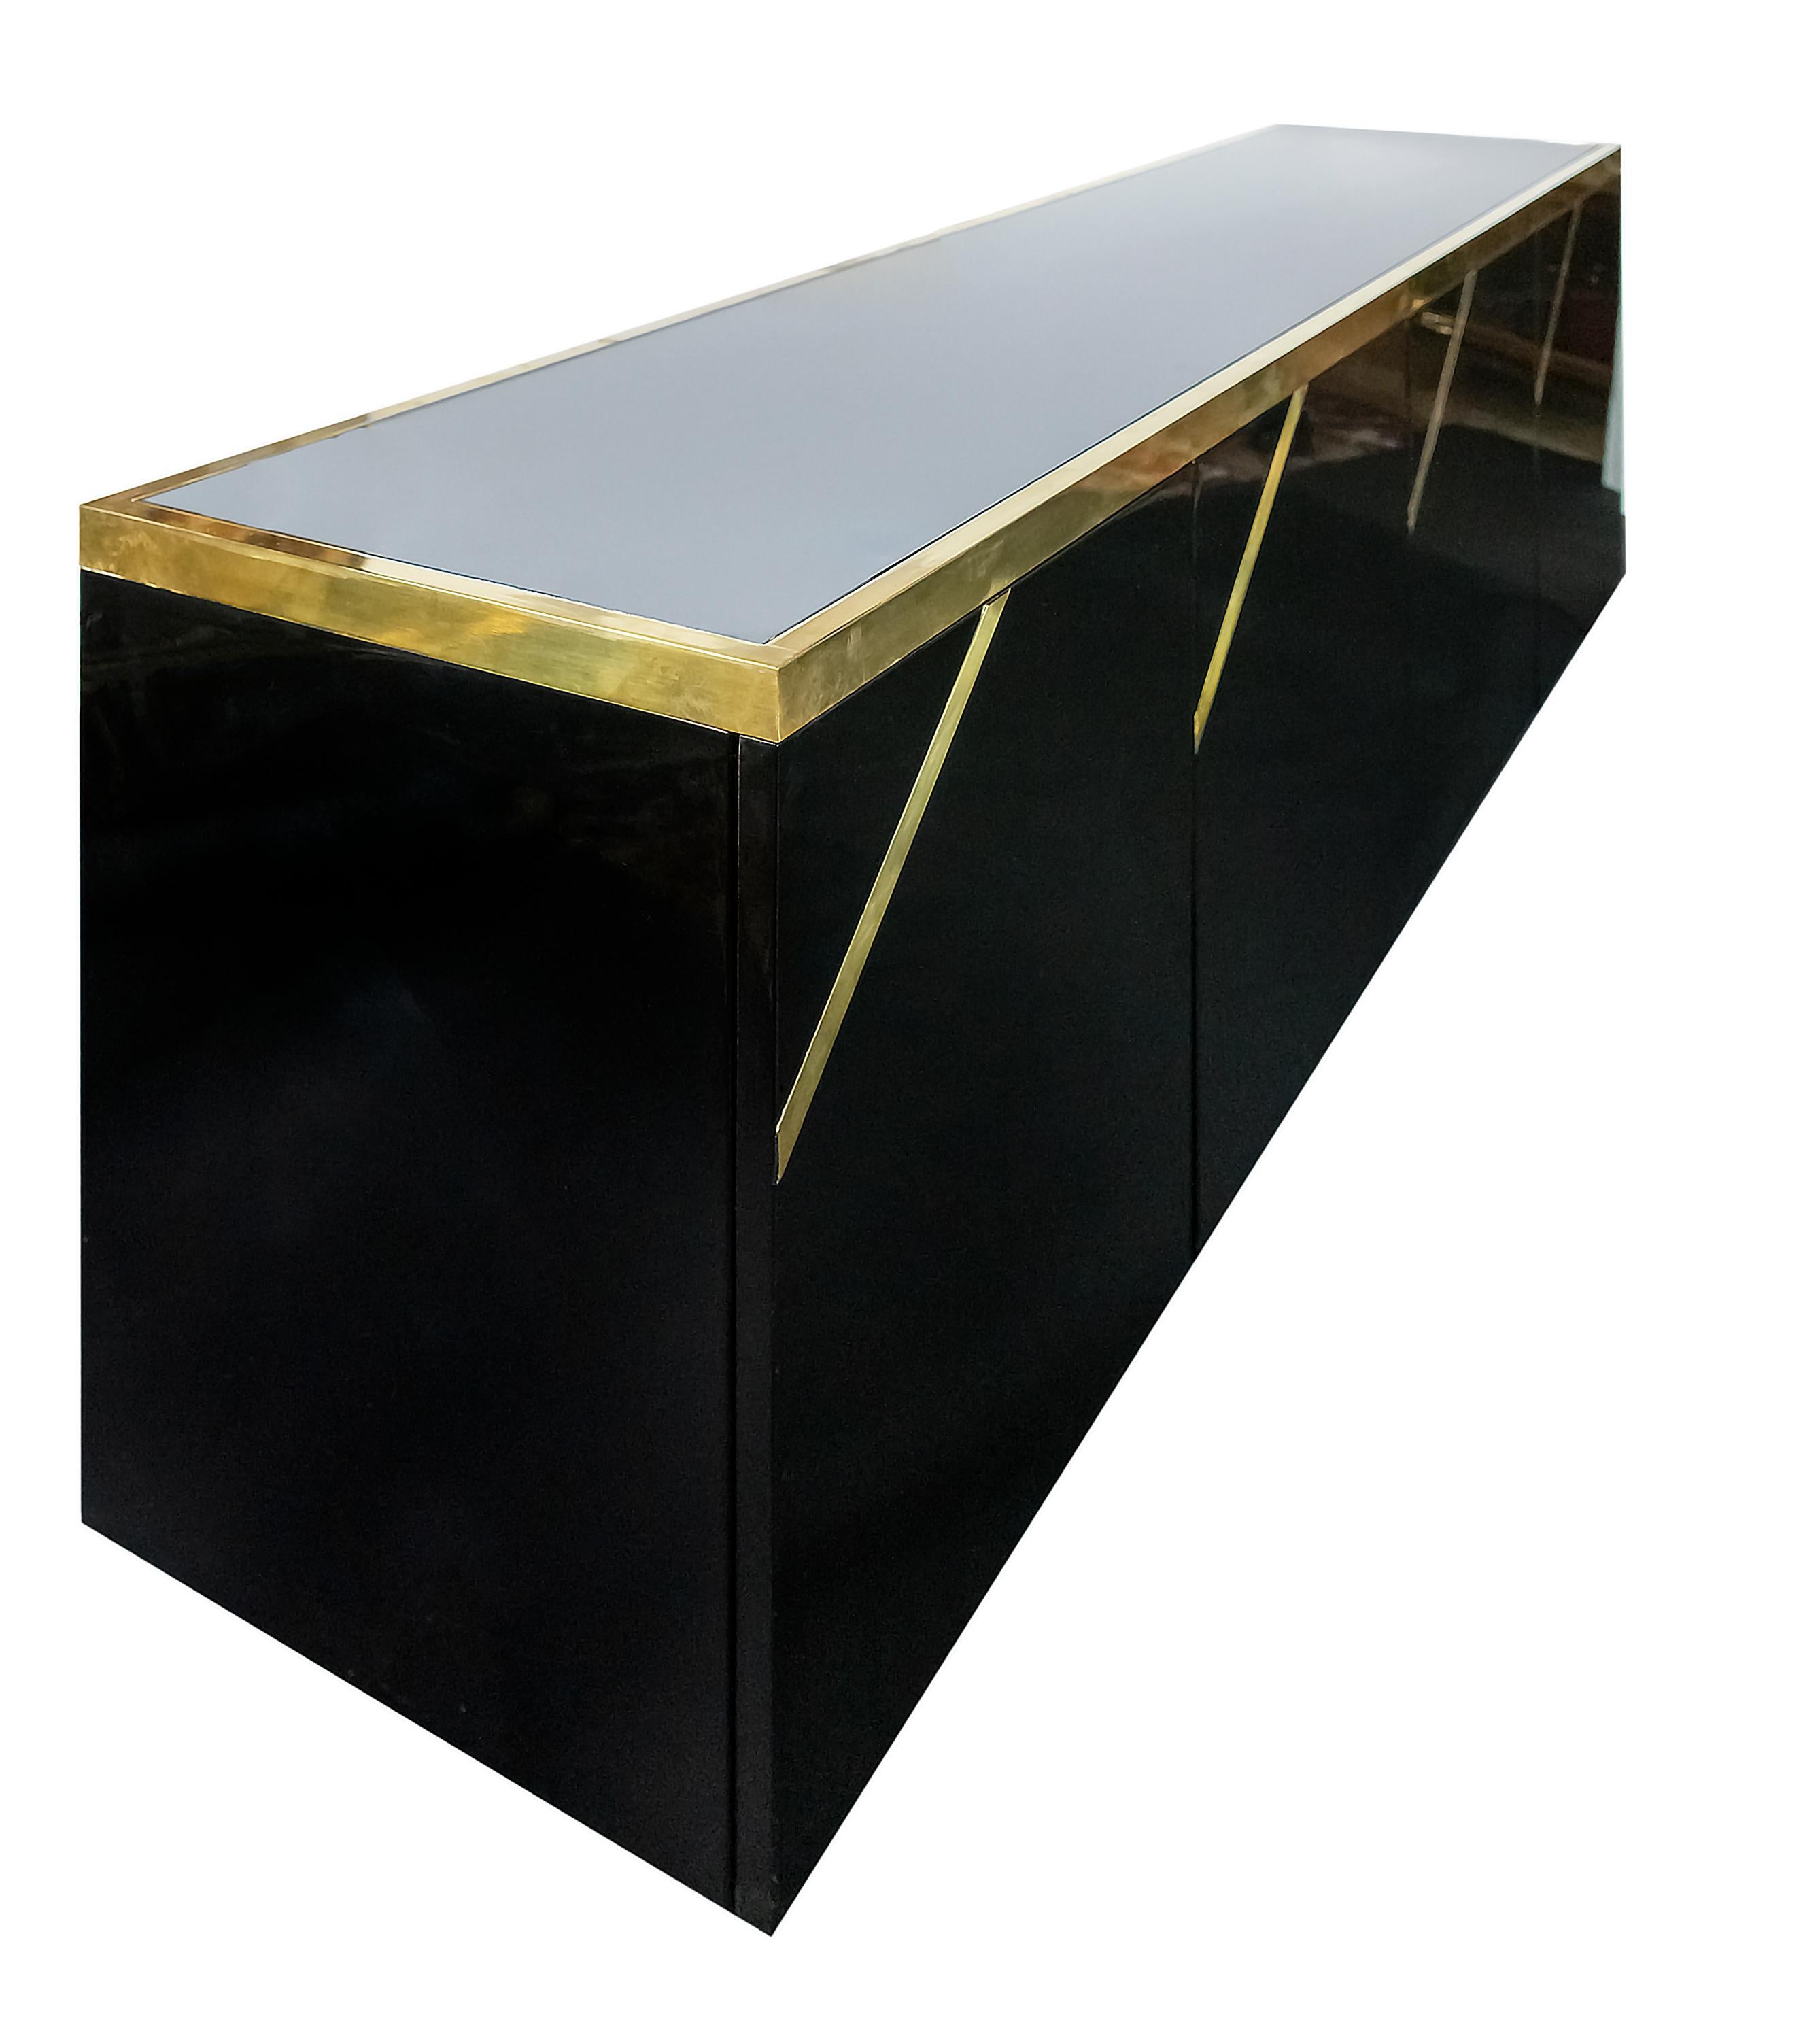 Italian vintage black color polished surface sideboard / commode from 1970s in the style of Willy Rizzo / Maison Jansen.
Doors are decorated with inlaid brass stripes details. Opens by pressure.
The top is decorated with thick and massive solid